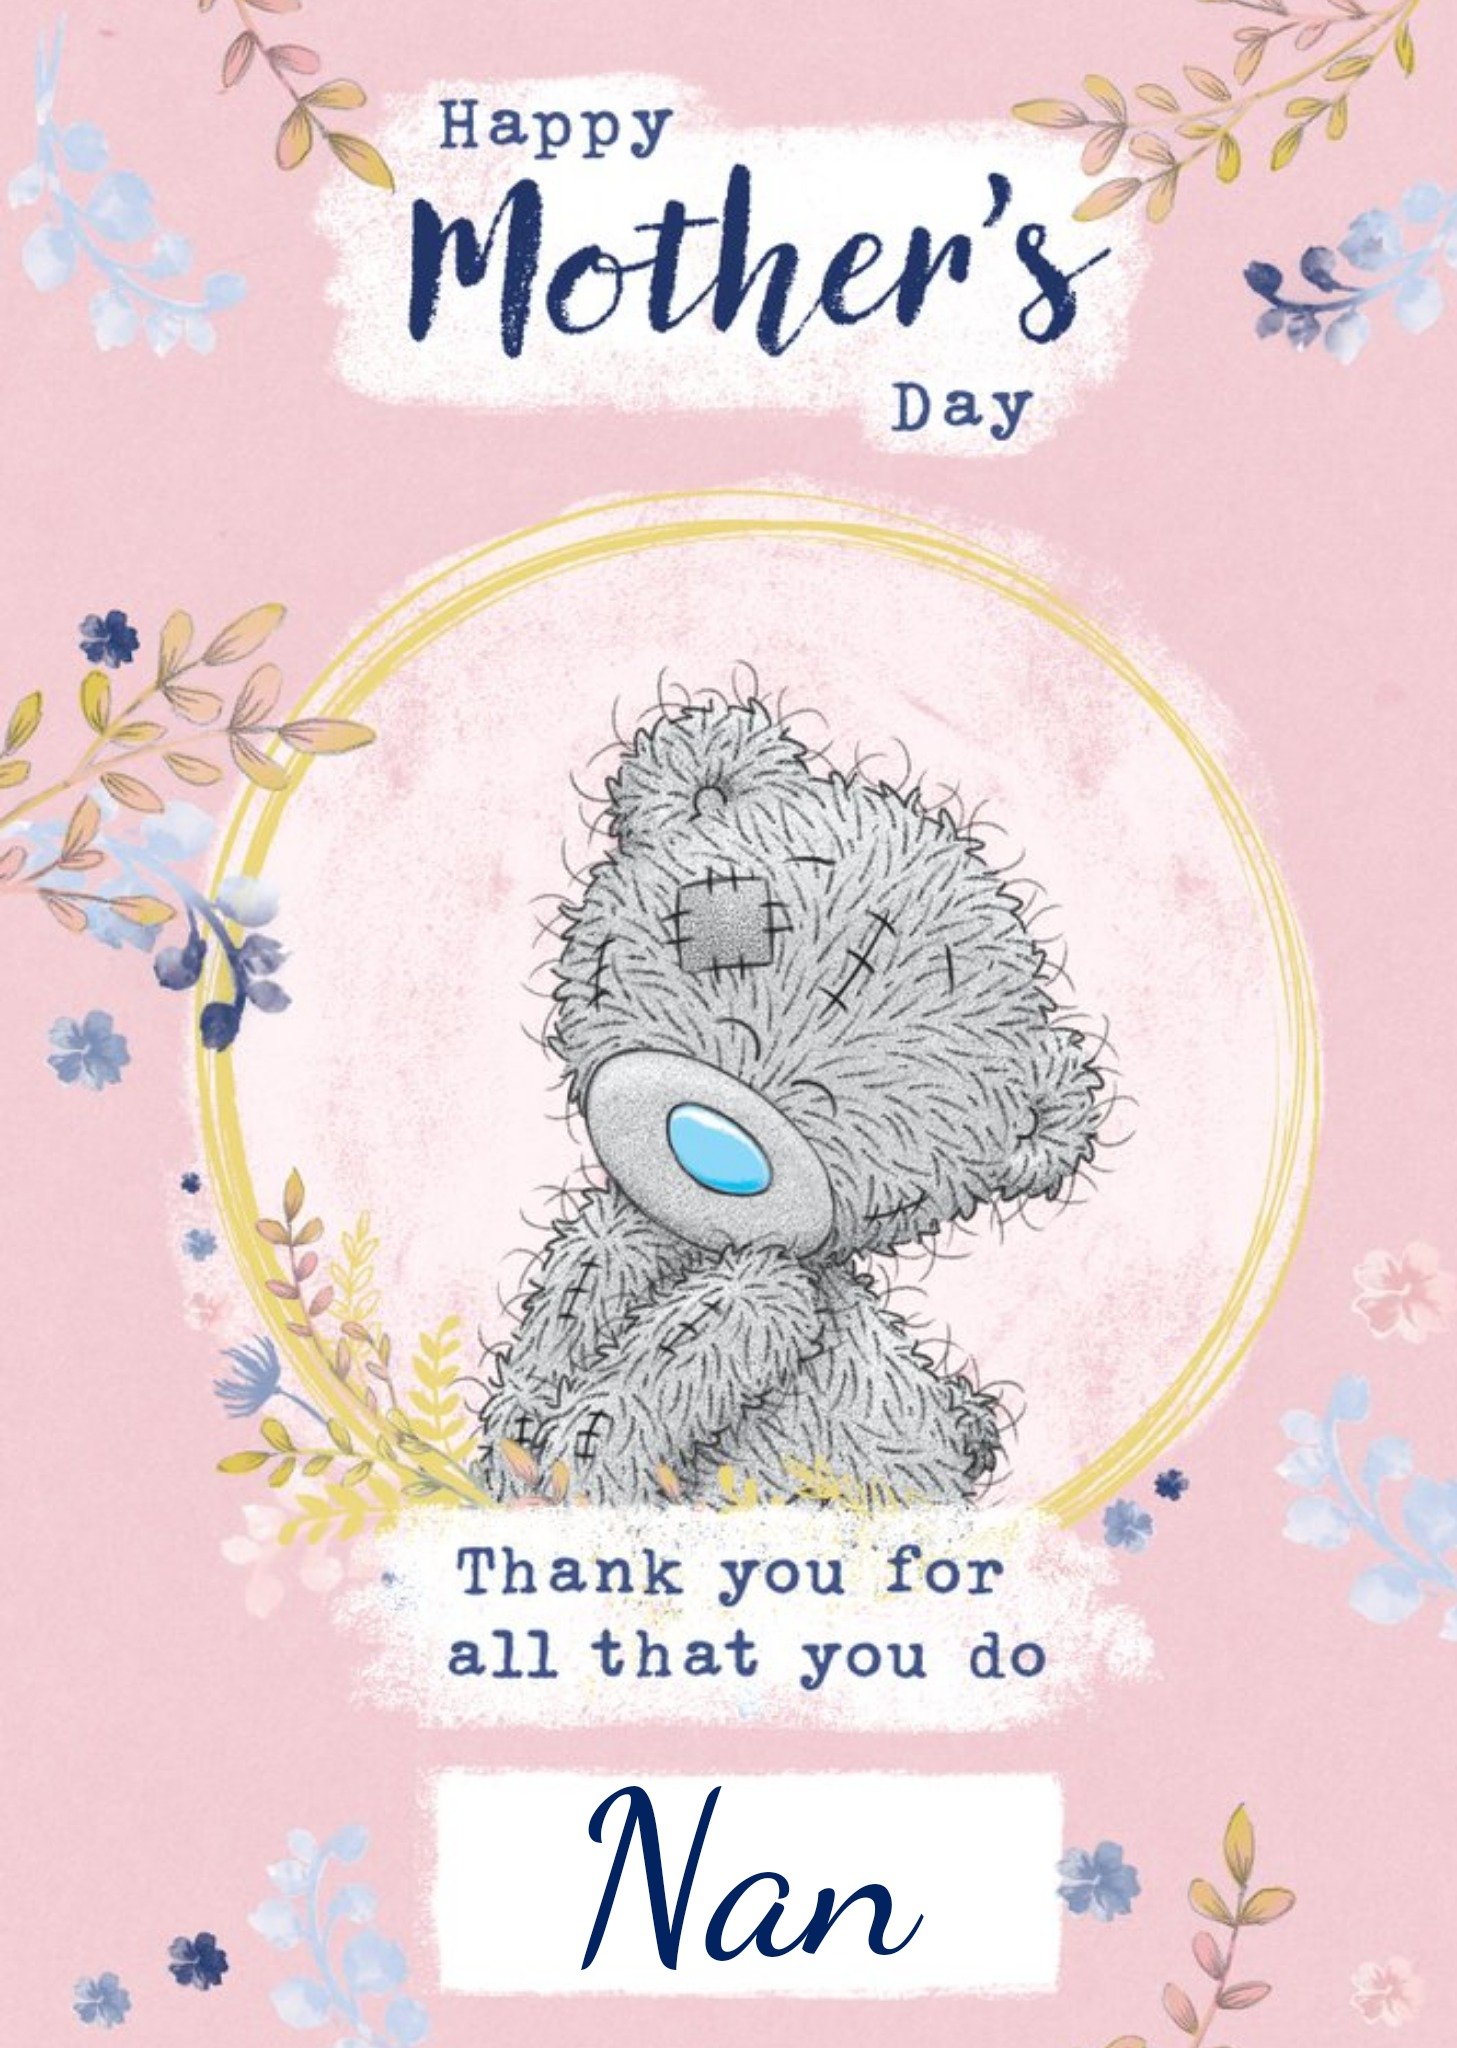 Me To You Tatty Teddy Thanks For All You Do Happy Mother's Day Nan Card, Large